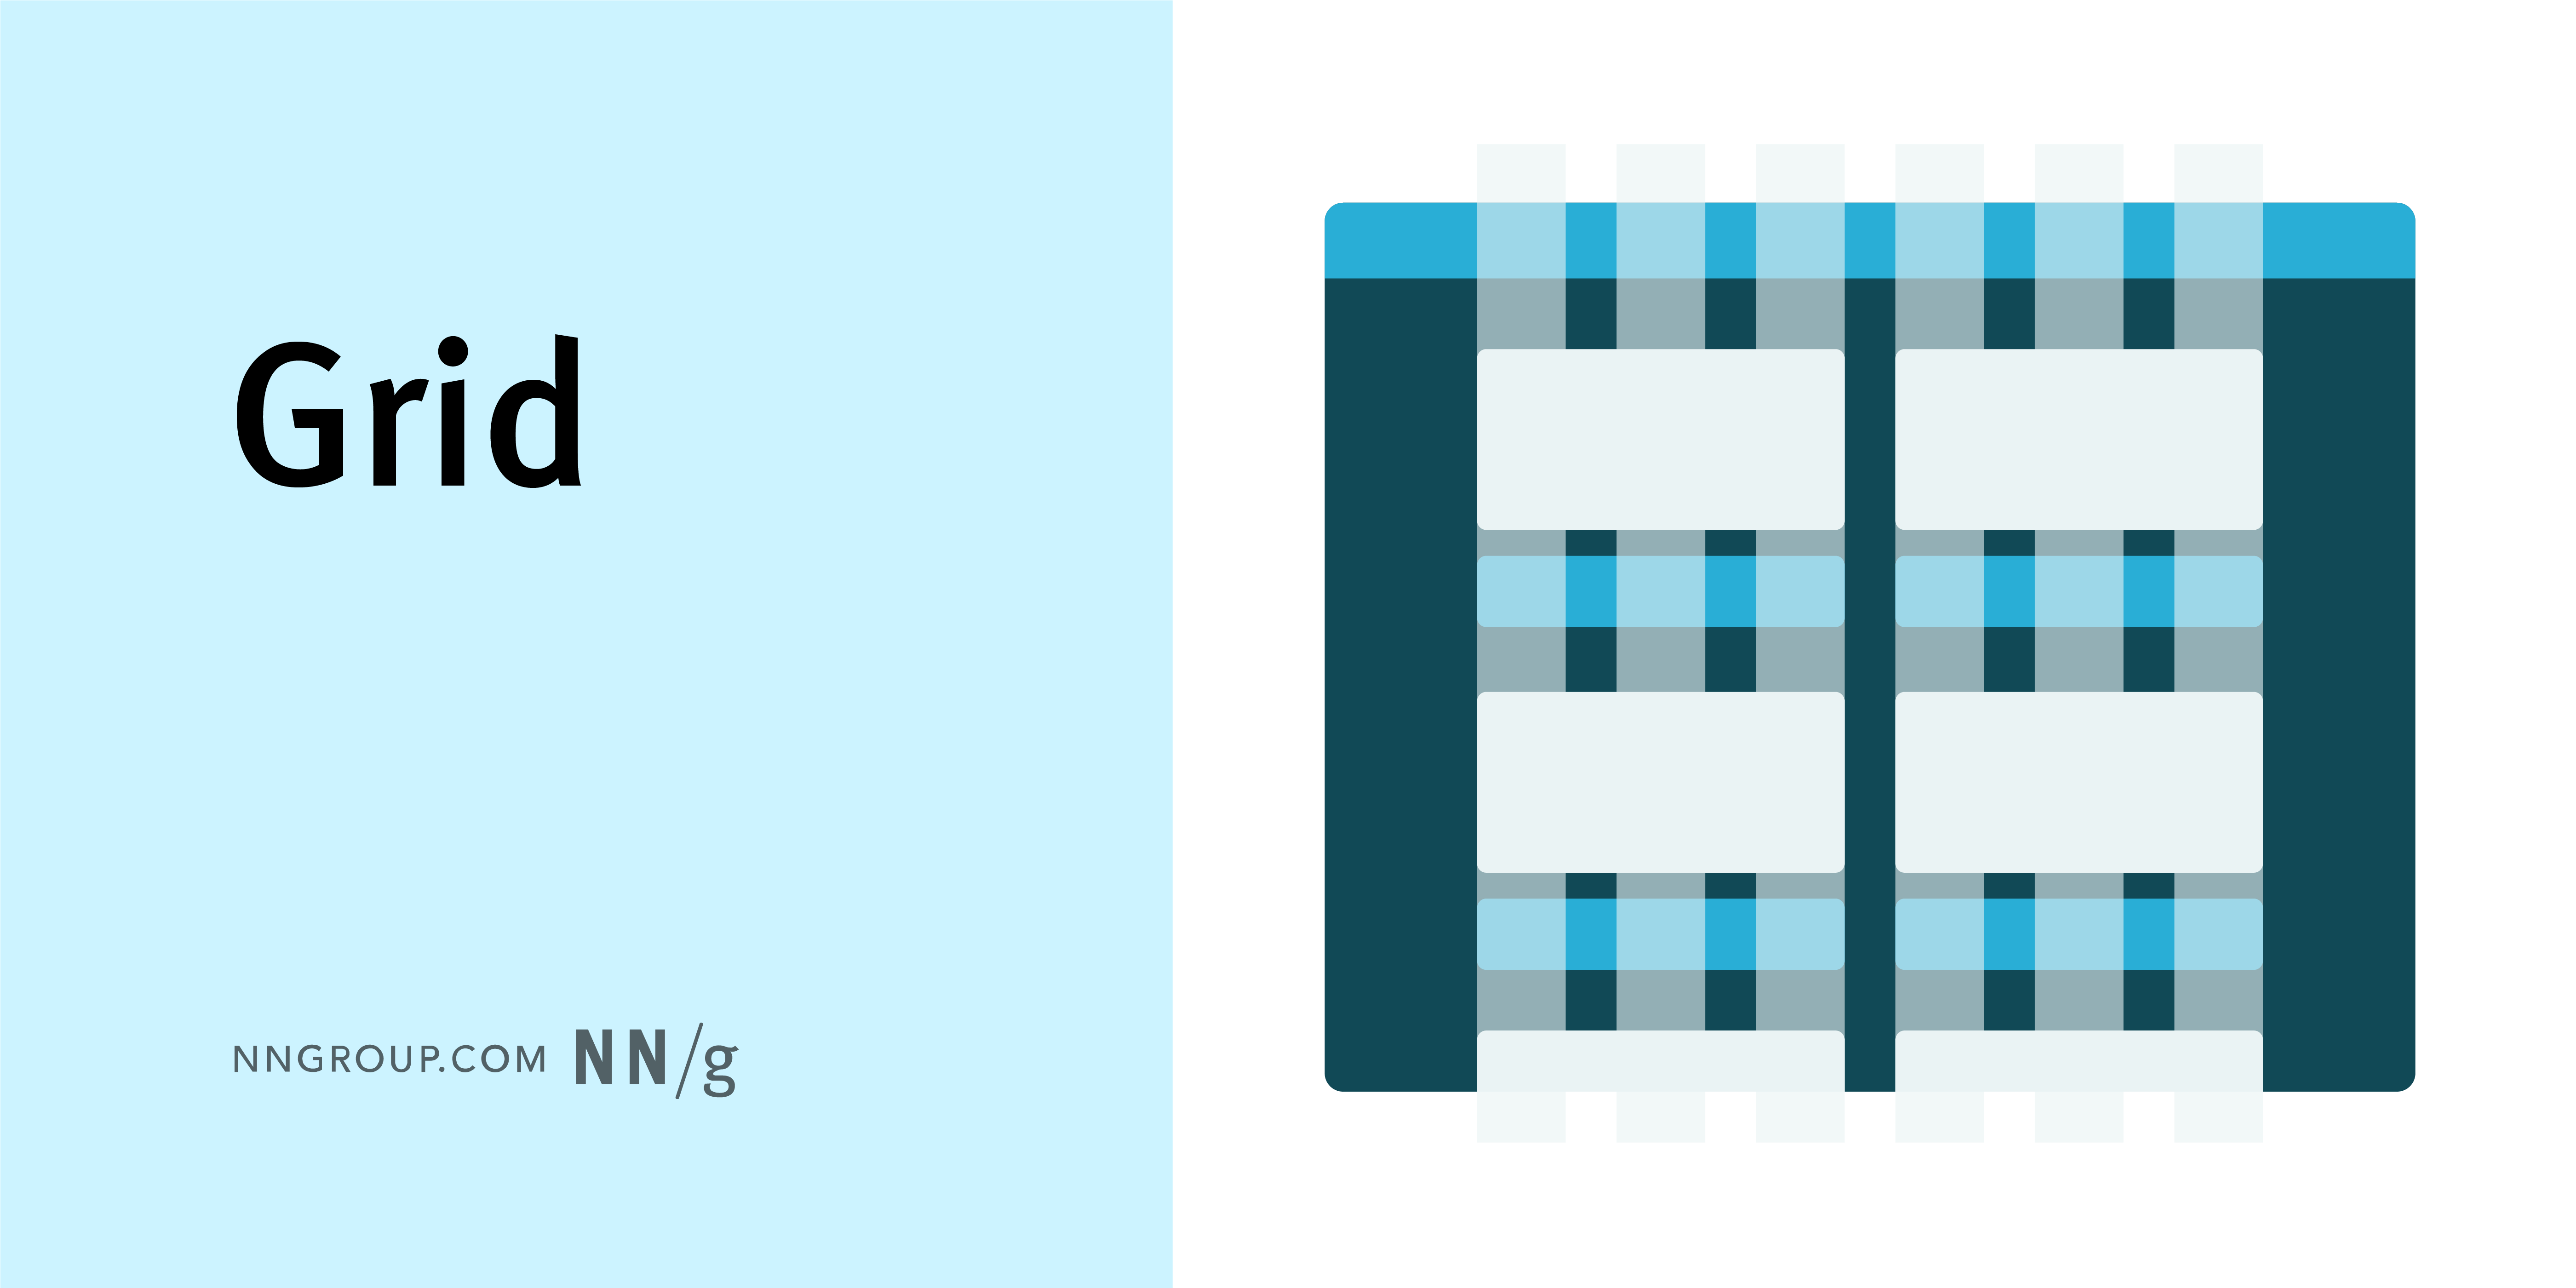 A complex grid layout in varying shades of blue and white